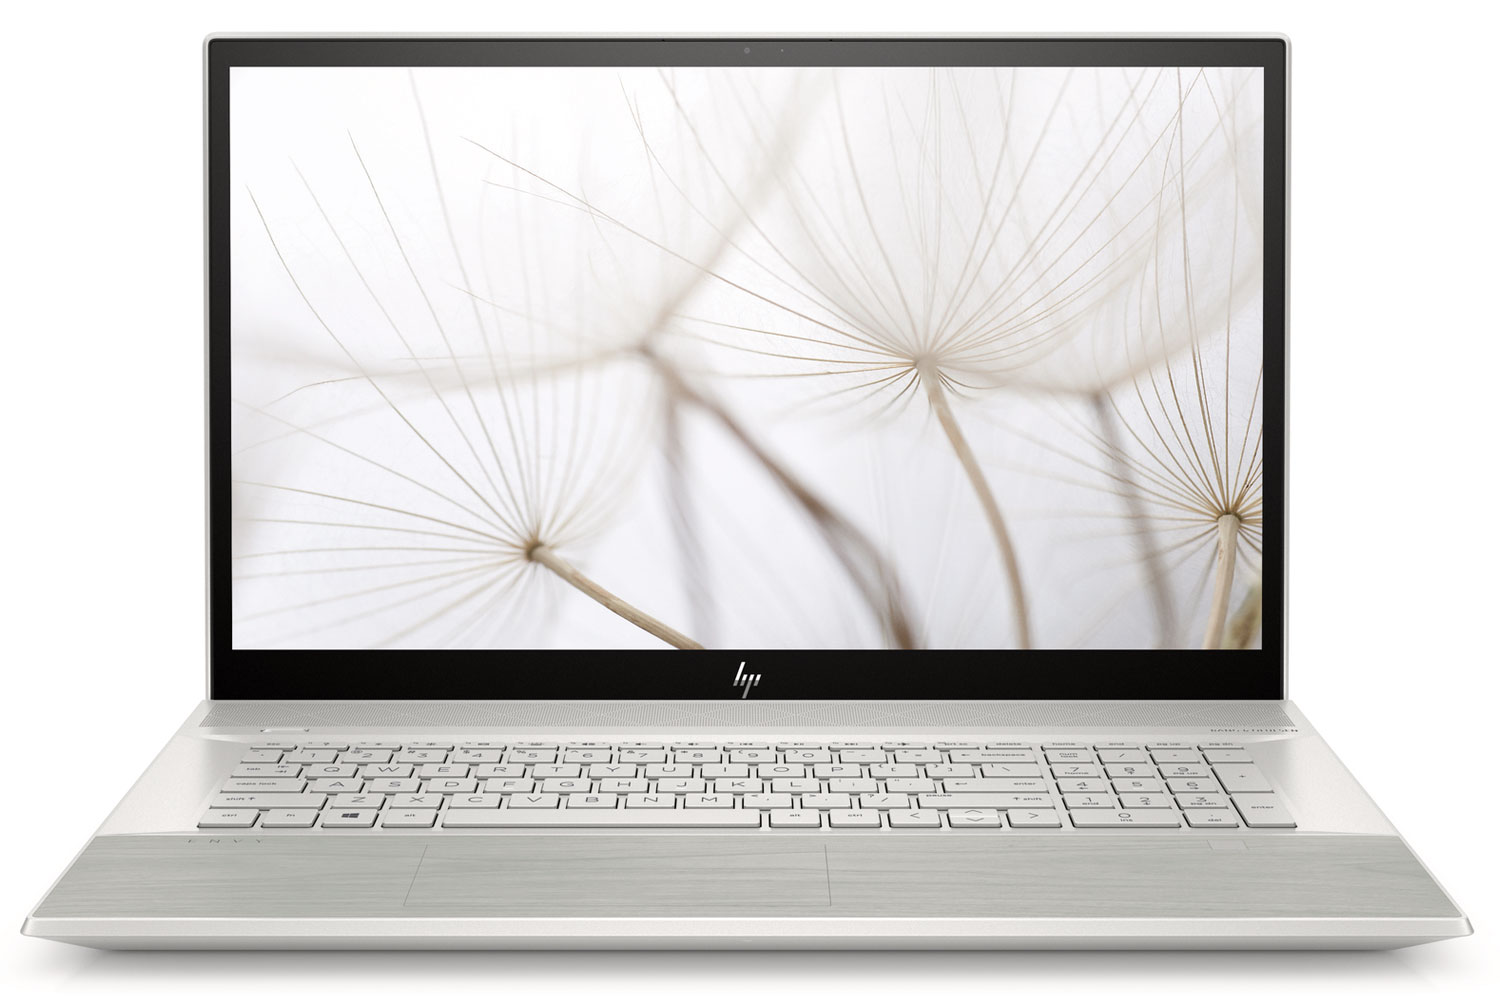 HP Envy 17 with a White Birch finish.